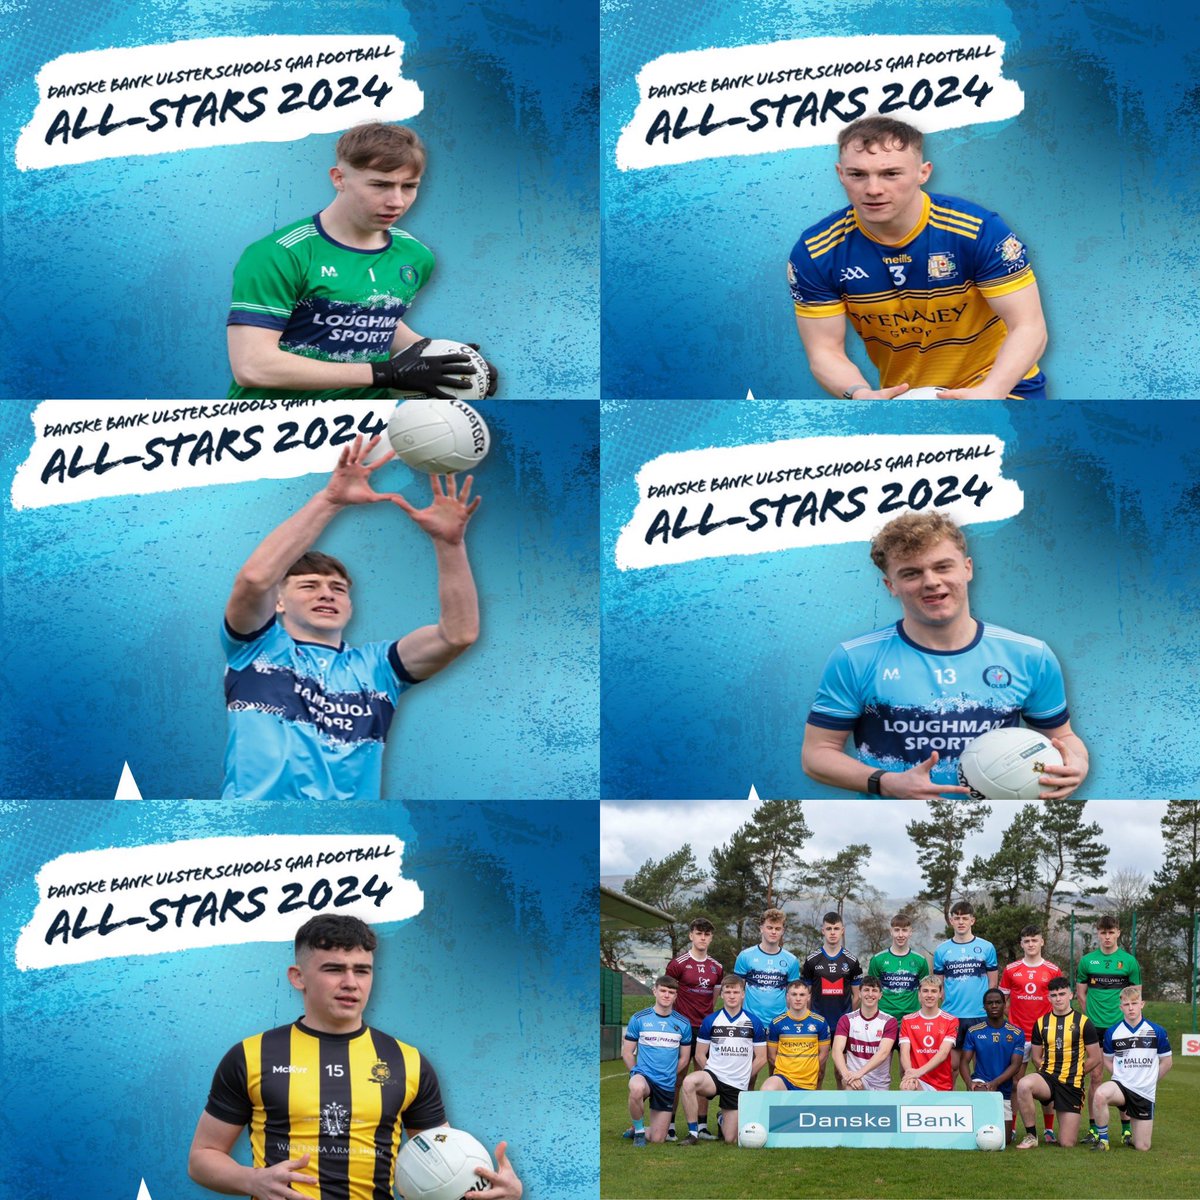 Huge congratulations to the 5 players who made it onto the 2024 @DanskeBank_UK @ulsterschools All Star Football team! This is a massive achievement and truly deserved by each player! @OLSSBlayney @patricianhigh & @stmacartans